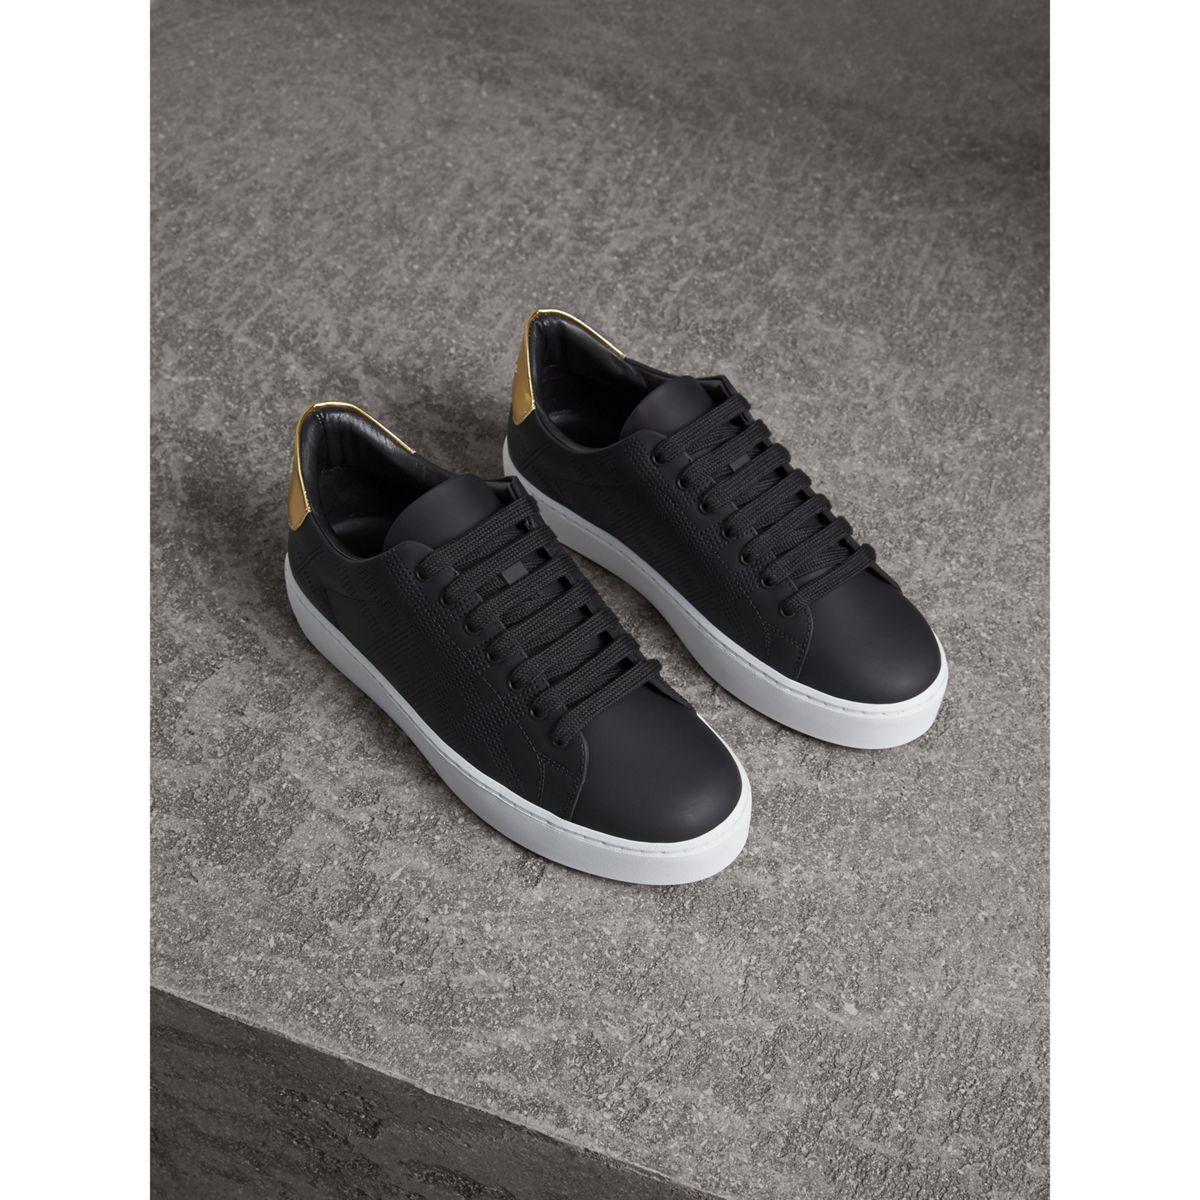 burberry perforated sneakers